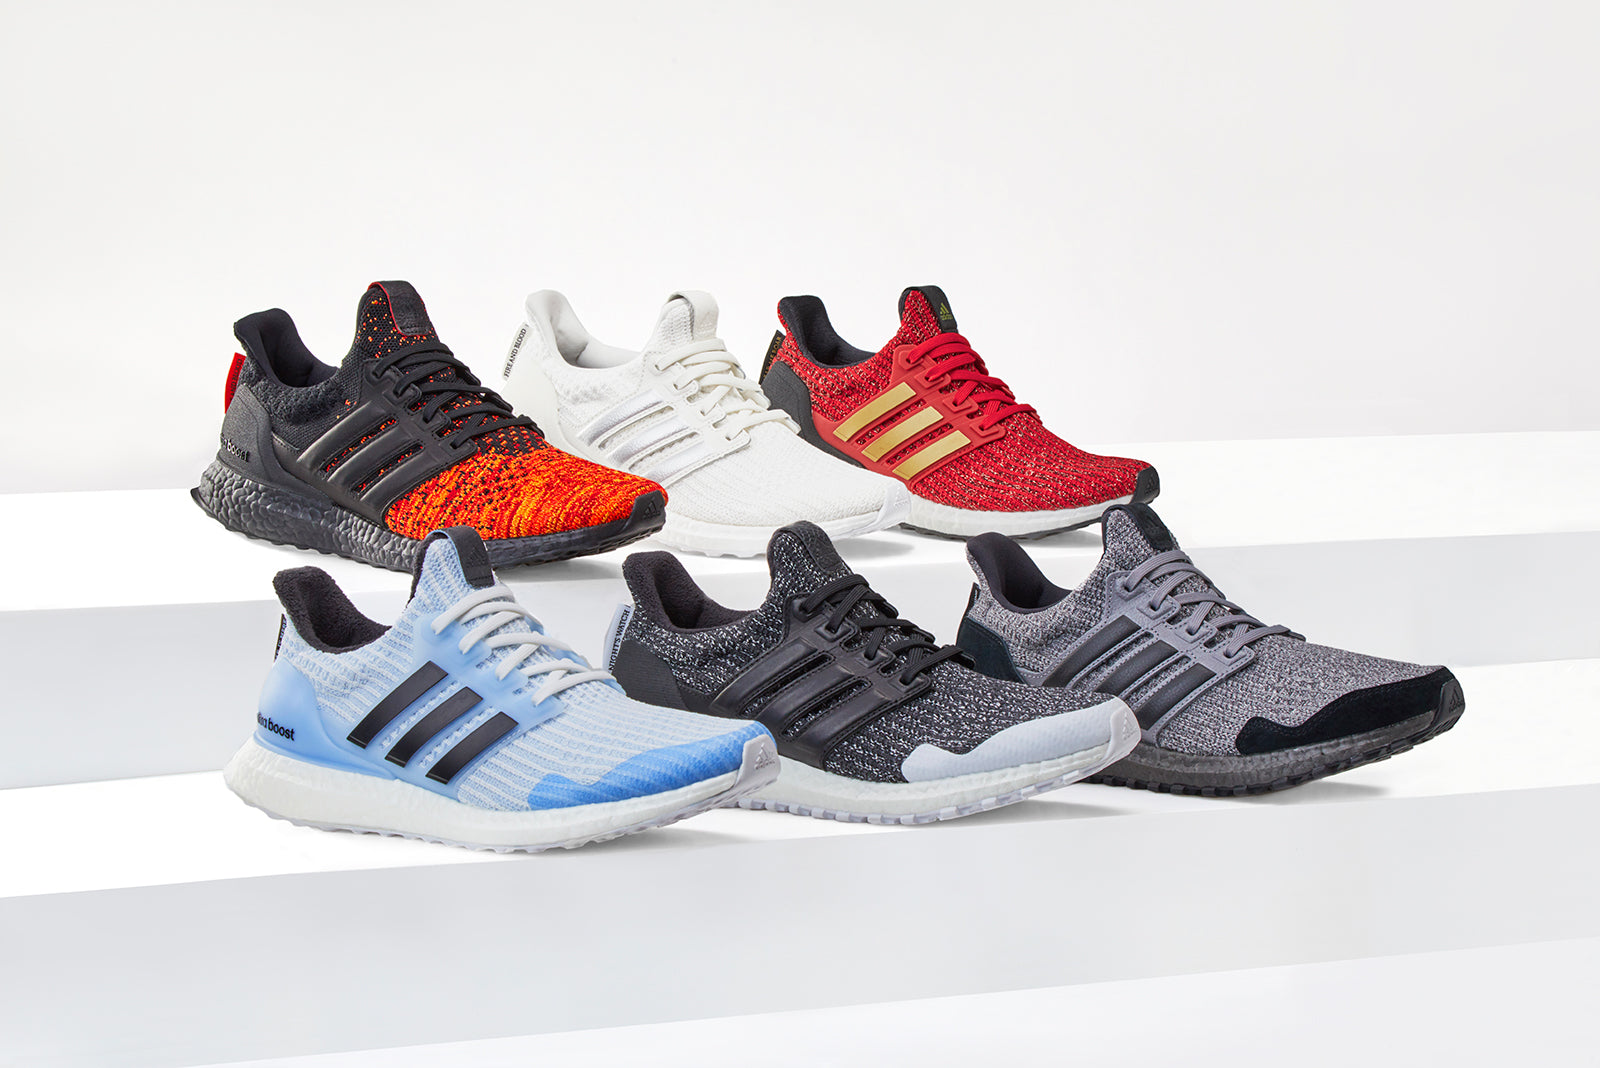 adidas winter is here